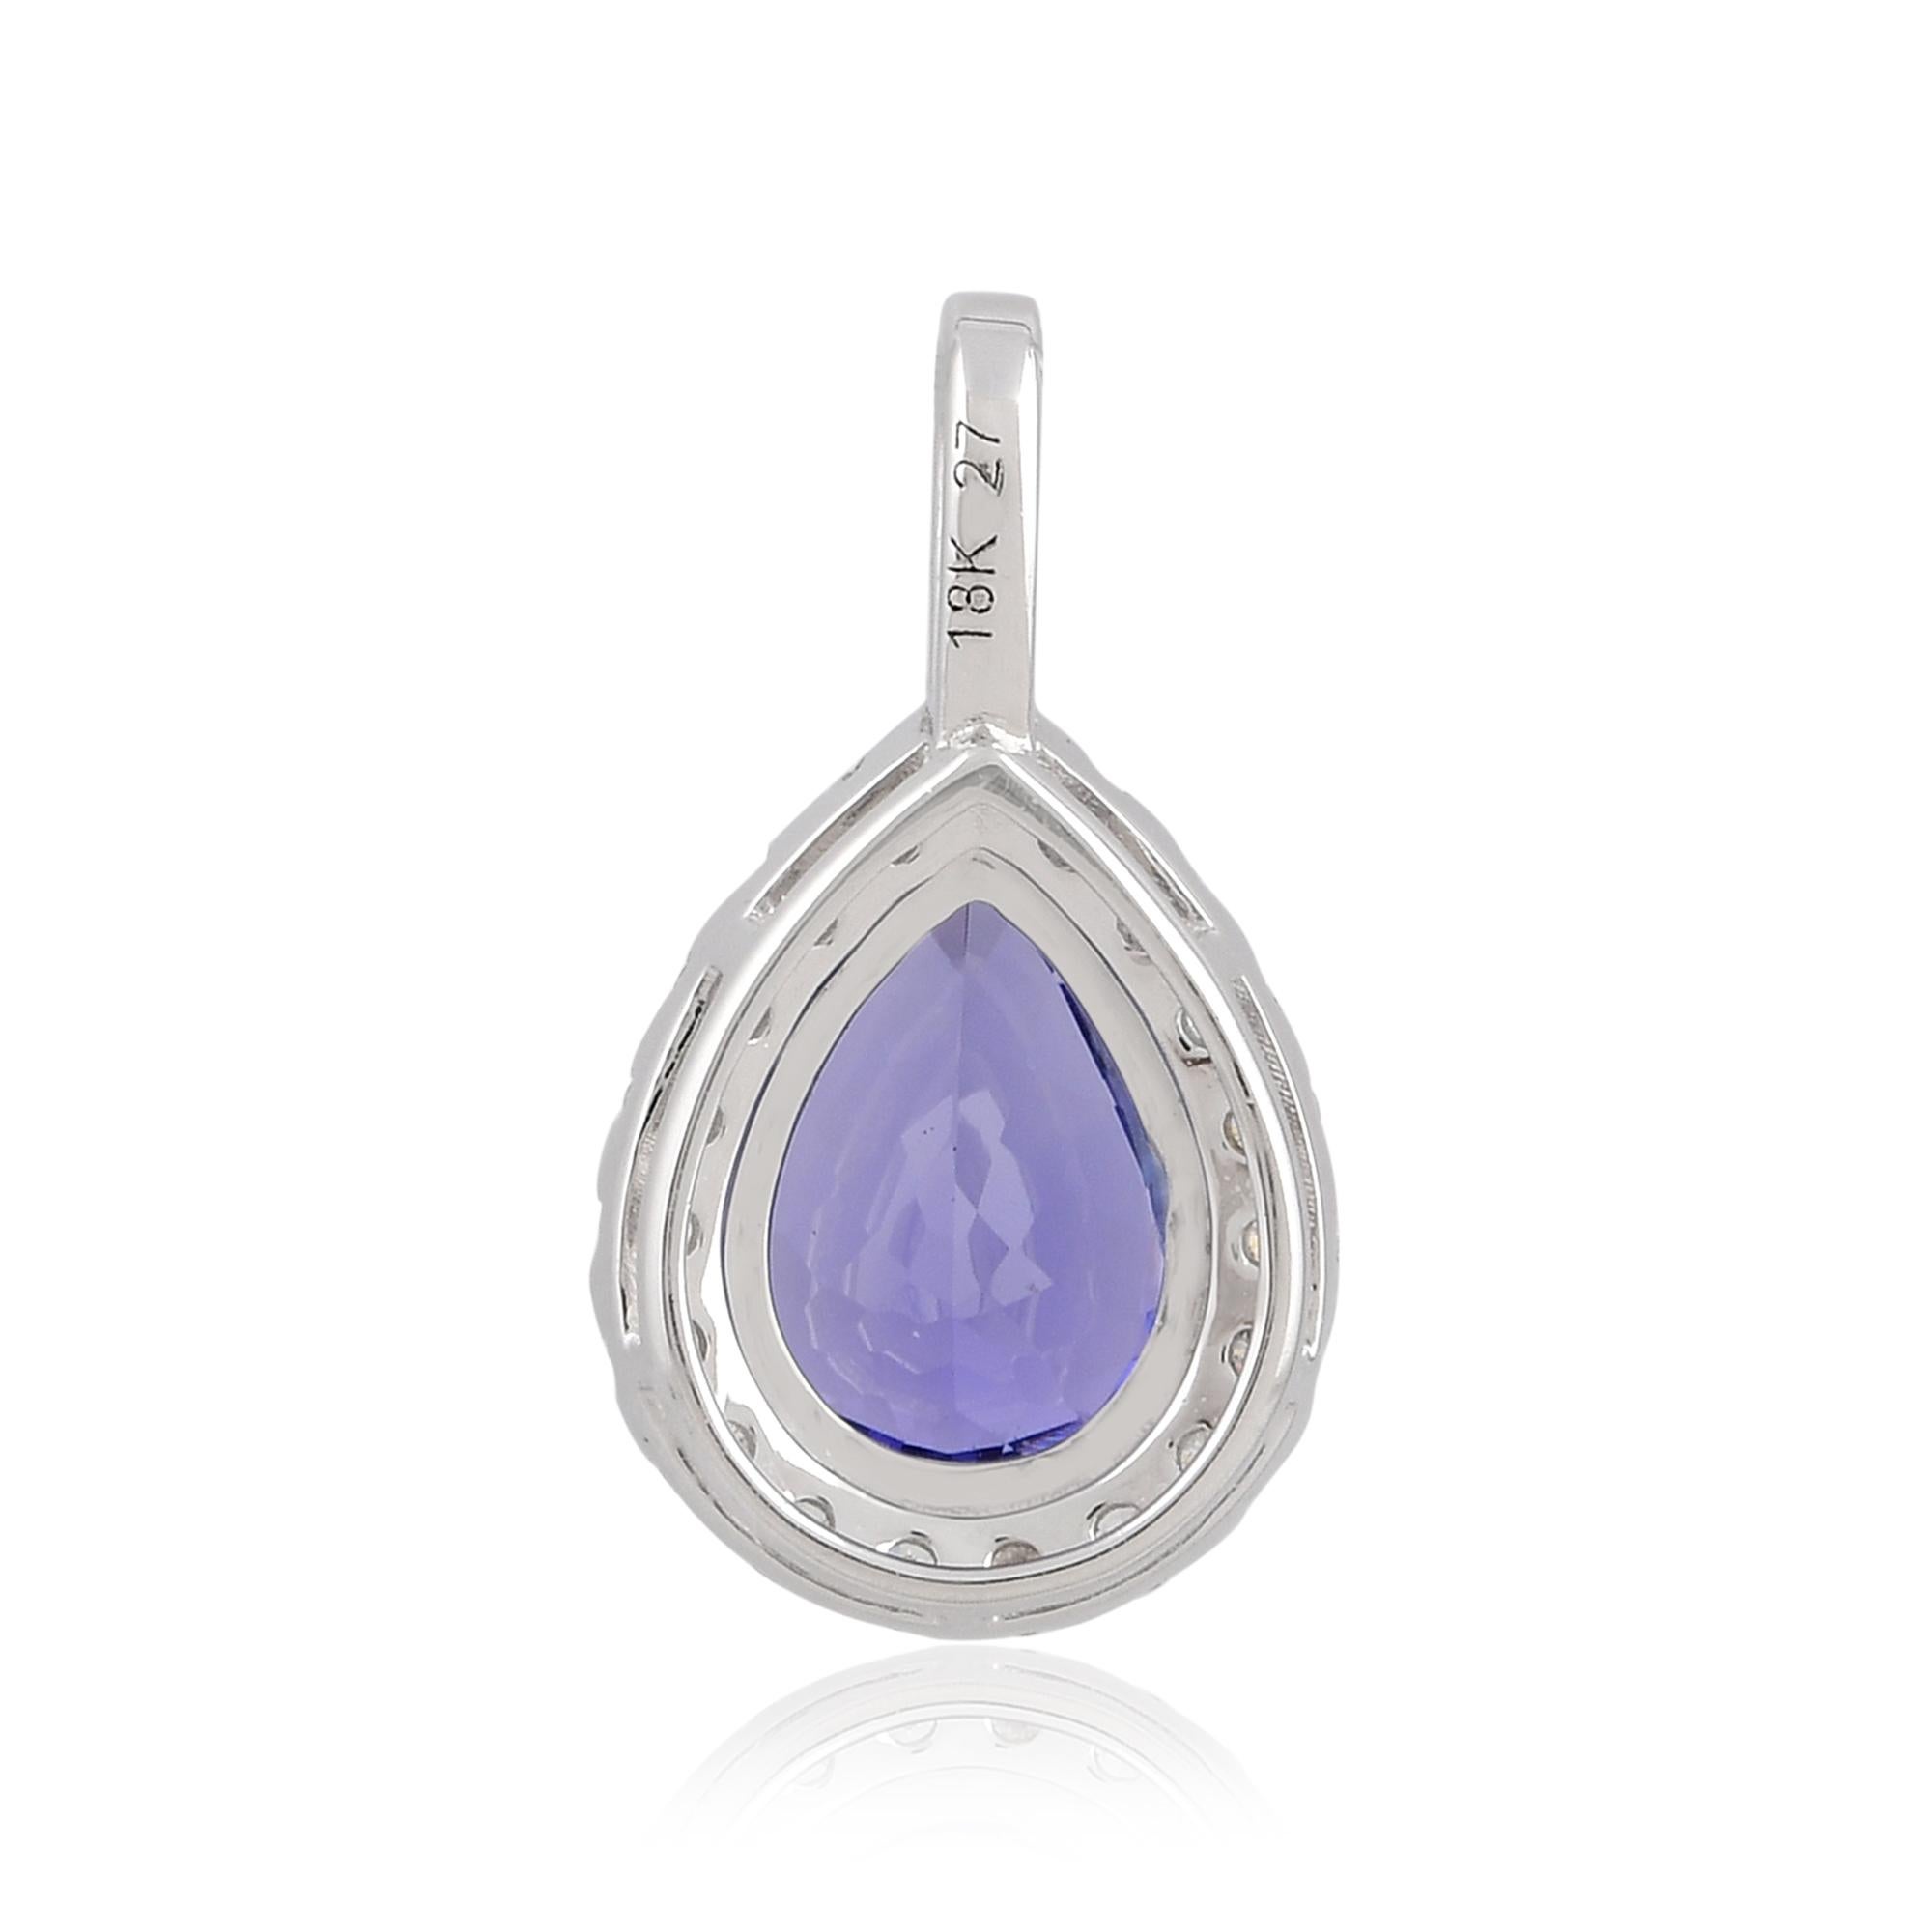 The pendant is expertly crafted in 18 karat white gold, chosen for its timeless appeal and enduring beauty. The white gold setting complements the Tanzanite and diamonds, creating a harmonious blend of sophistication and refinement.

Item Code :-